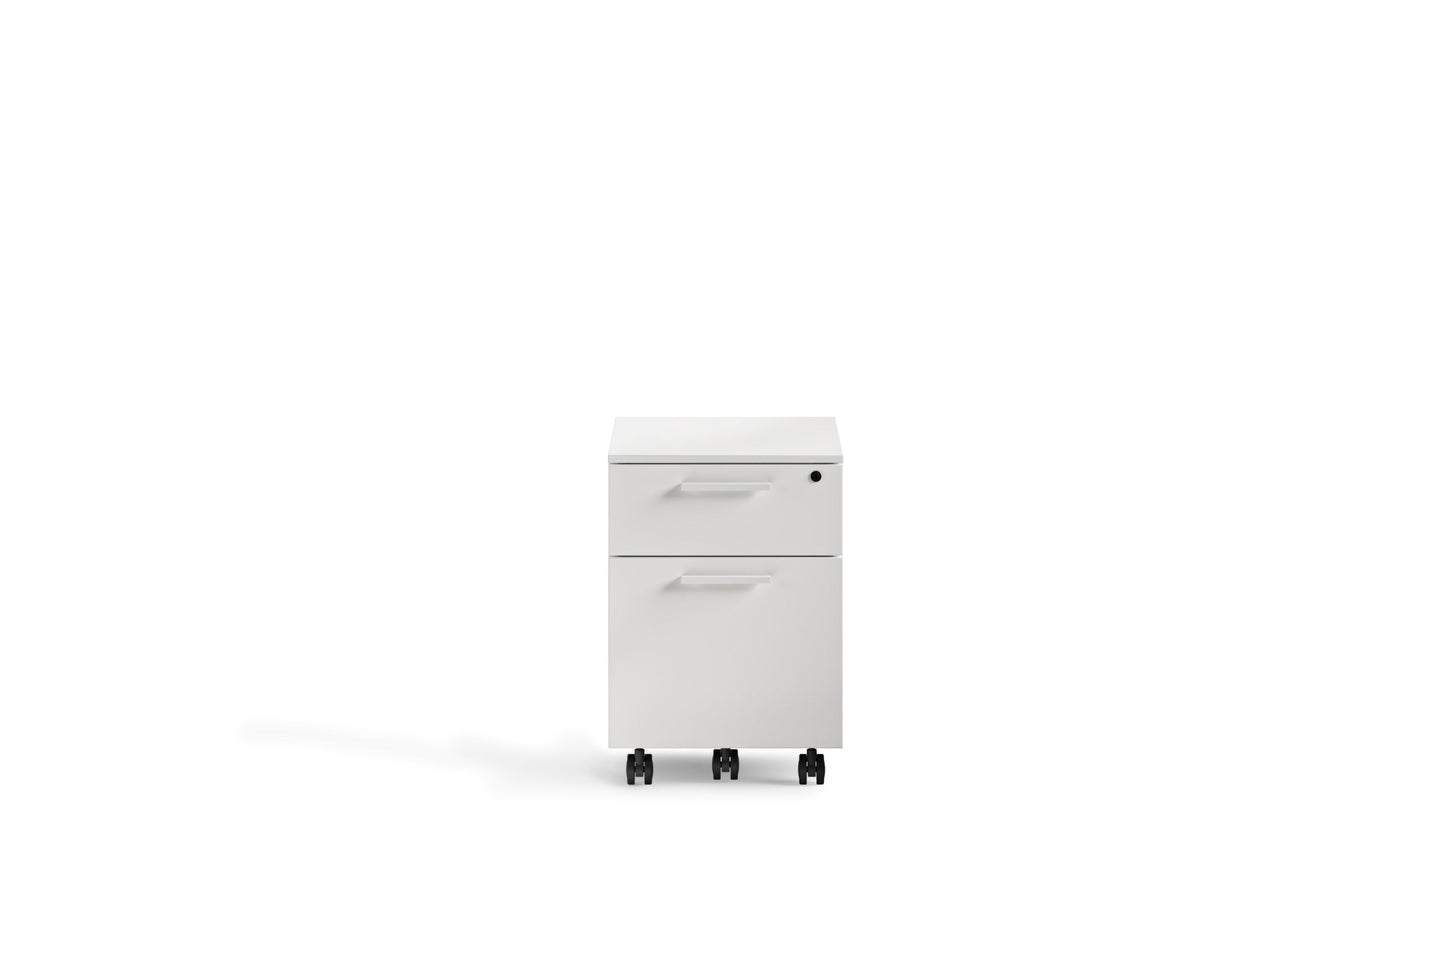 Linea 6227 Home Office Mobile Locking File Cabinet